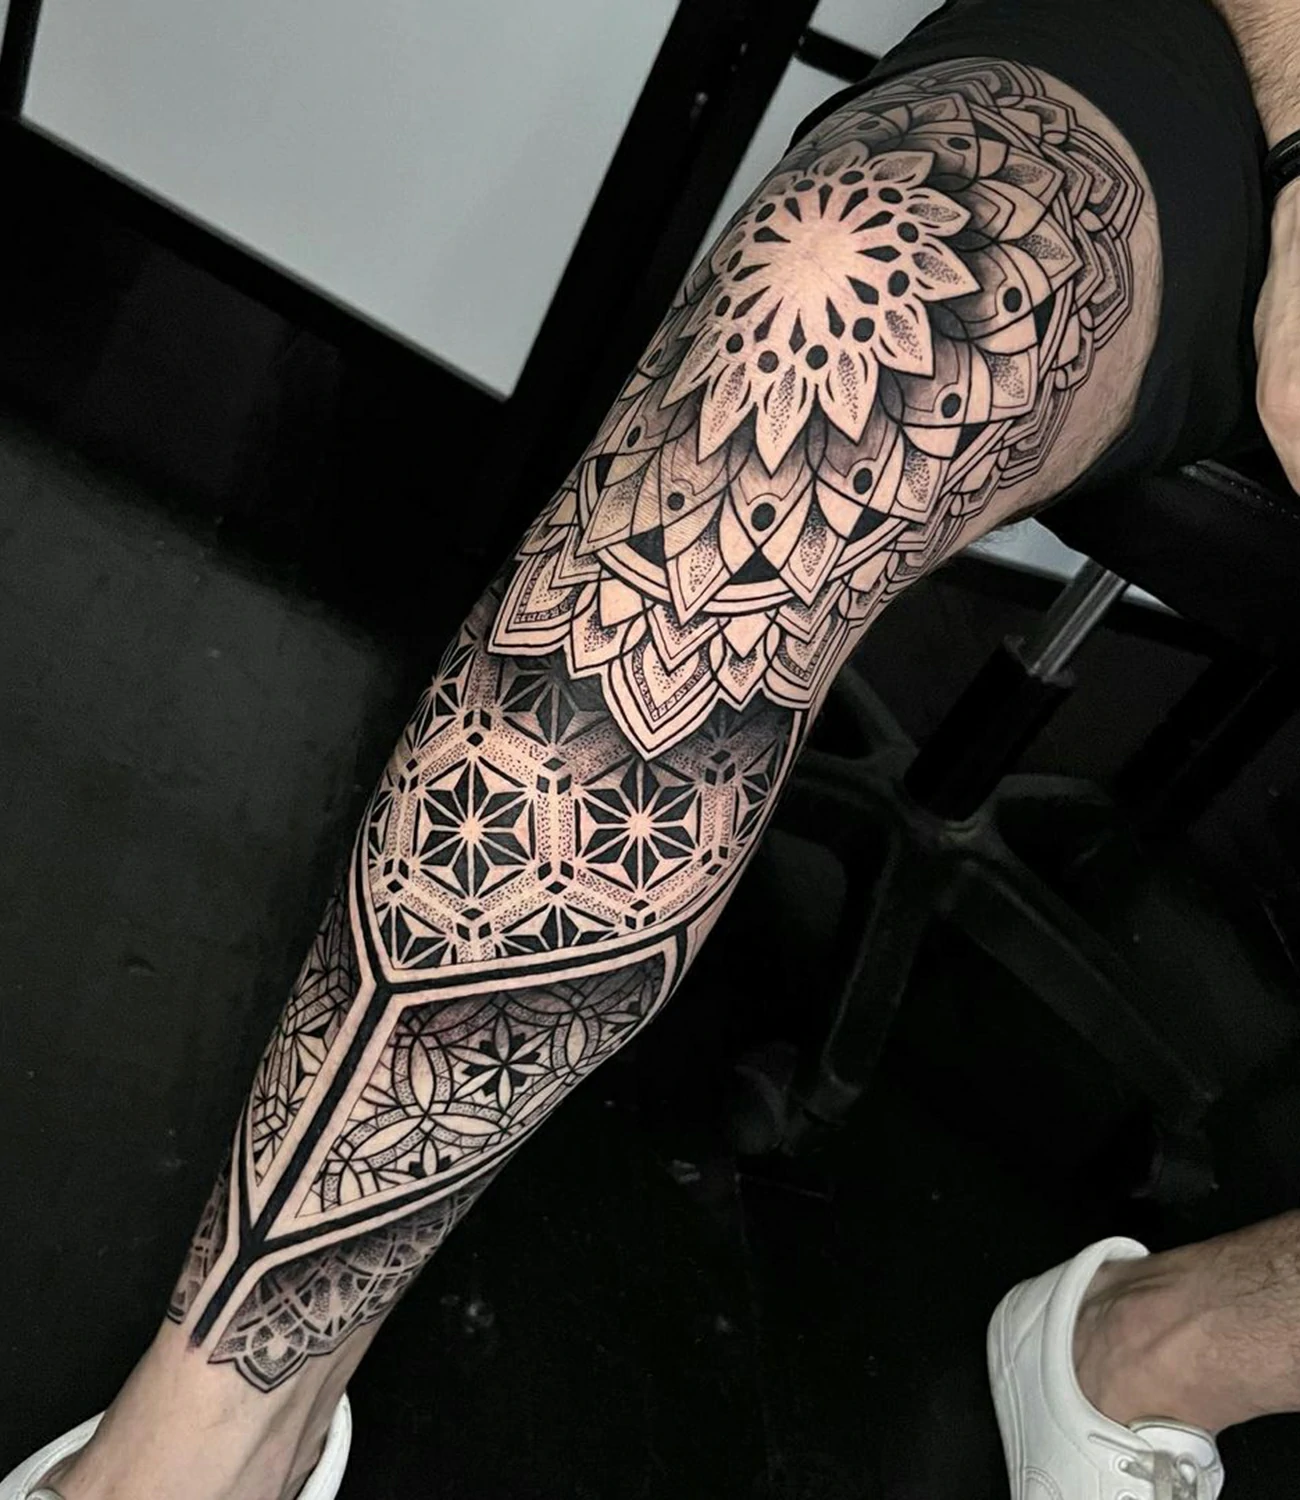 Geometric Leg Tattoo: Geometric leg tattoos cover the leg with intricate shapes and patterns, creating a visually appealing design.